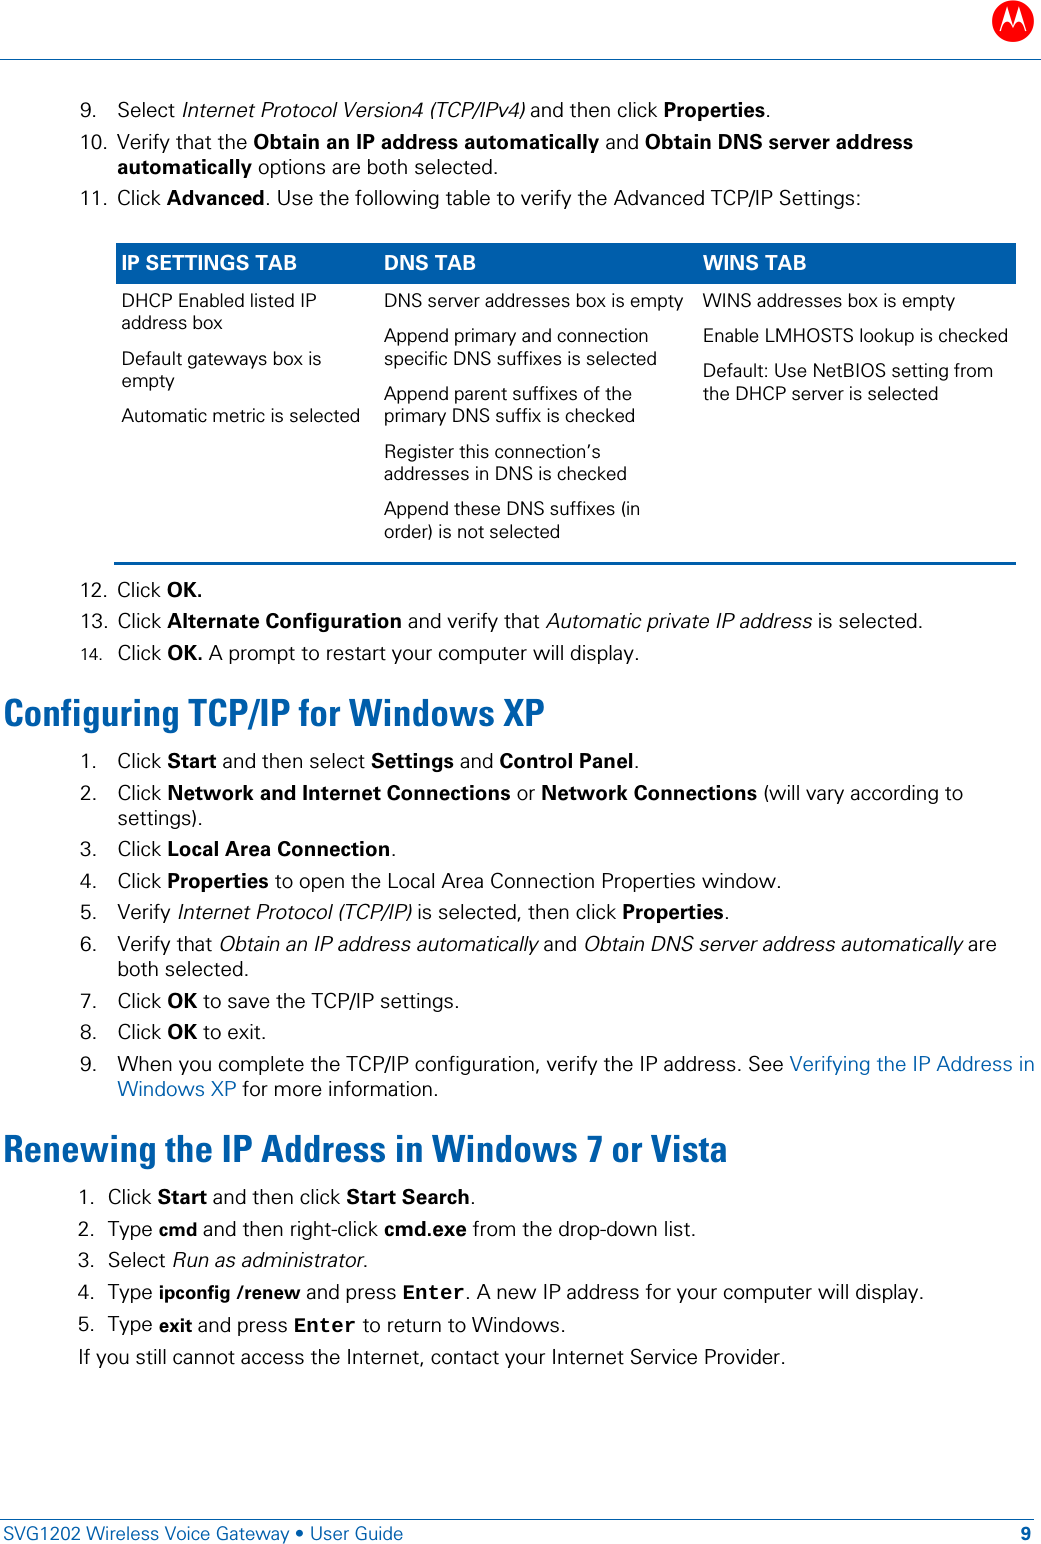 B   SVG1202 Wireless Voice Gateway • User Guide 9  9. Select Internet Protocol Version4 (TCP/IPv4) and then click Properties.  10. Verify that the Obtain an IP address automatically and Obtain DNS server address automatically options are both selected. 11. Click Advanced. Use the following table to verify the Advanced TCP/IP Settings:  IP SETTINGS TAB DNS TAB WINS TAB DHCP Enabled listed IP address box Default gateways box is empty Automatic metric is selected  DNS server addresses box is empty  Append primary and connection specific DNS suffixes is selected  Append parent suffixes of the primary DNS suffix is checked  Register this connection’s addresses in DNS is checked  Append these DNS suffixes (in order) is not selected WINS addresses box is empty Enable LMHOSTS lookup is checked Default: Use NetBIOS setting from the DHCP server is selected 12. Click OK.  13. Click Alternate Configuration and verify that Automatic private IP address is selected. 14. Click OK. A prompt to restart your computer will display.  Configuring TCP/IP for Windows XP 1. Click Start and then select Settings and Control Panel. 2. Click Network and Internet Connections or Network Connections (will vary according to settings).   3. Click Local Area Connection. 4. Click Properties to open the Local Area Connection Properties window.  5. Verify Internet Protocol (TCP/IP) is selected, then click Properties. 6. Verify that Obtain an IP address automatically and Obtain DNS server address automatically are both selected. 7. Click OK to save the TCP/IP settings. 8. Click OK to exit. 9. When you complete the TCP/IP configuration, verify the IP address. See Verifying the IP Address in Windows XP for more information. Renewing the IP Address in Windows 7 or Vista 1. Click Start and then click Start Search. 2. Type cmd and then right-click cmd.exe from the drop-down list. 3. Select Run as administrator. 4. Type ipconfig /renew and press Enter. A new IP address for your computer will display. 5. Type exit and press Enter to return to Windows.  If you still cannot access the Internet, contact your Internet Service Provider. 